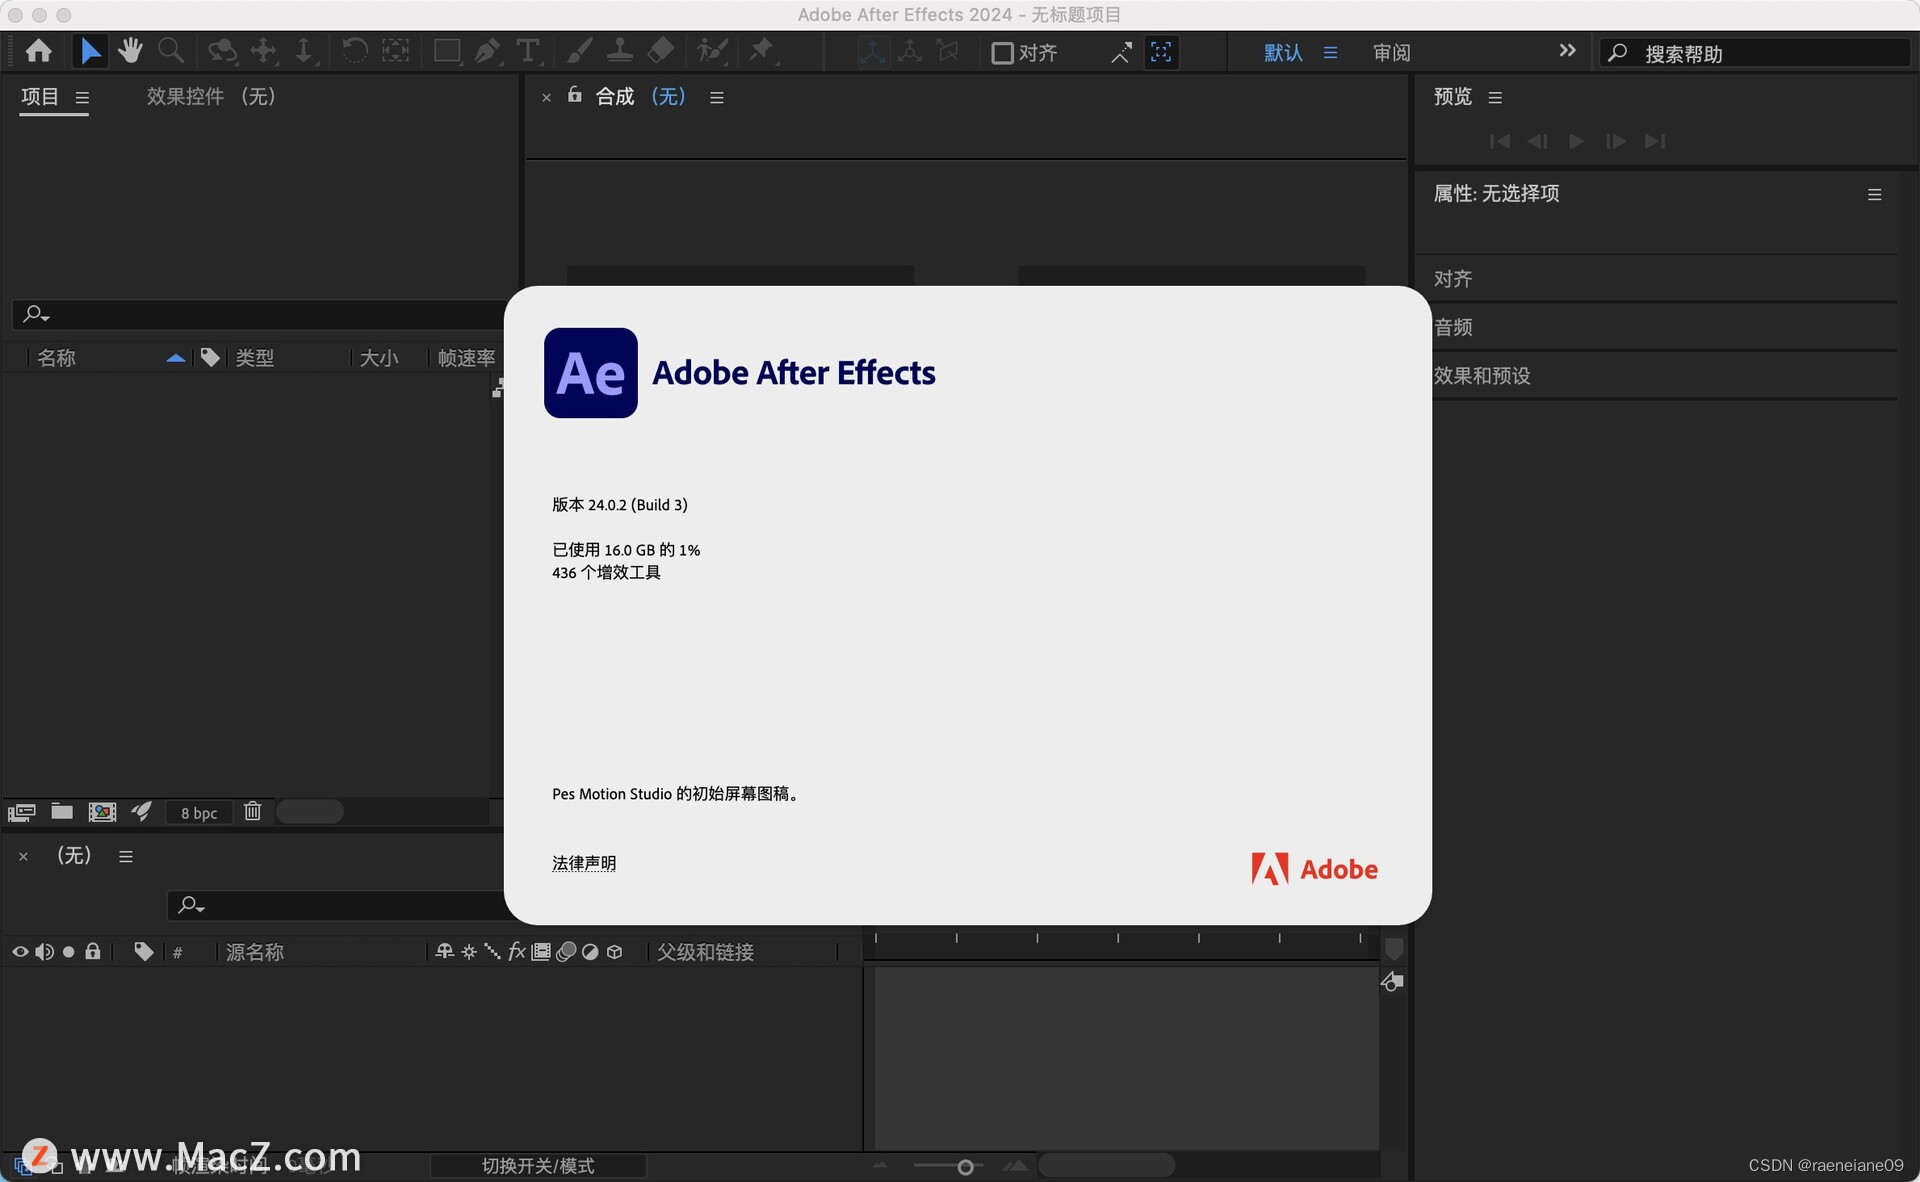 Adobe After Effects 2024 v24.0.0.55 download the new version for android